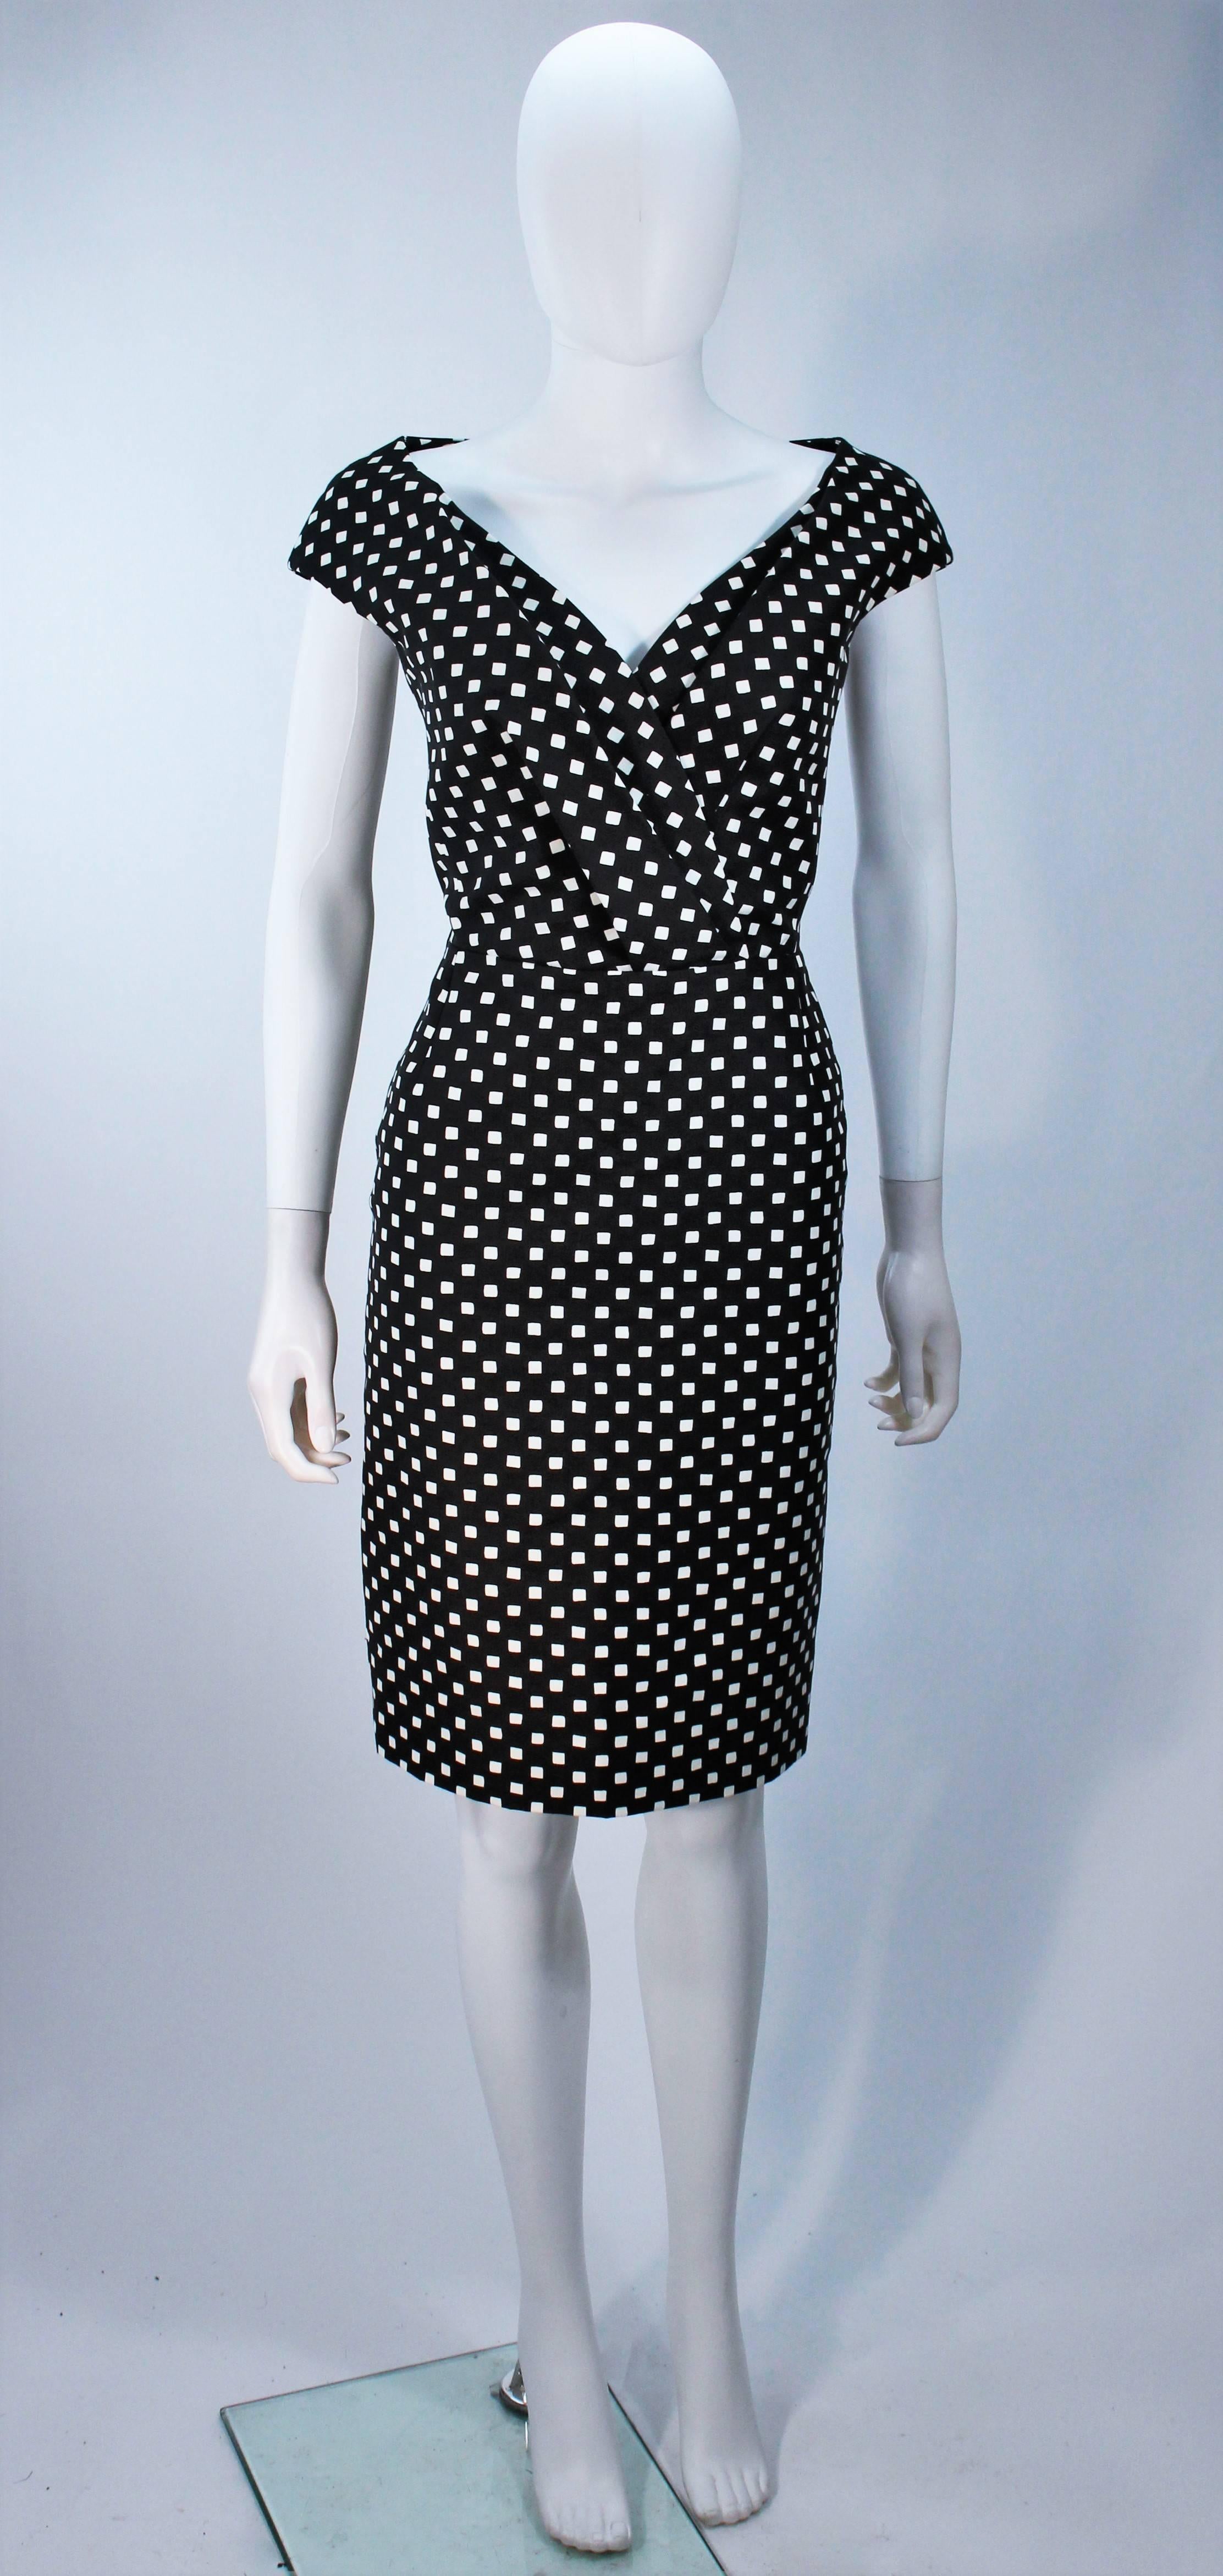  This Christian Dior design is available for viewing at our Beverly Hills Boutique. We offer a large selection of evening gowns and luxury garments. 

 This dress is composed of a black and white checkered fabric. Features a wide plunge neckline